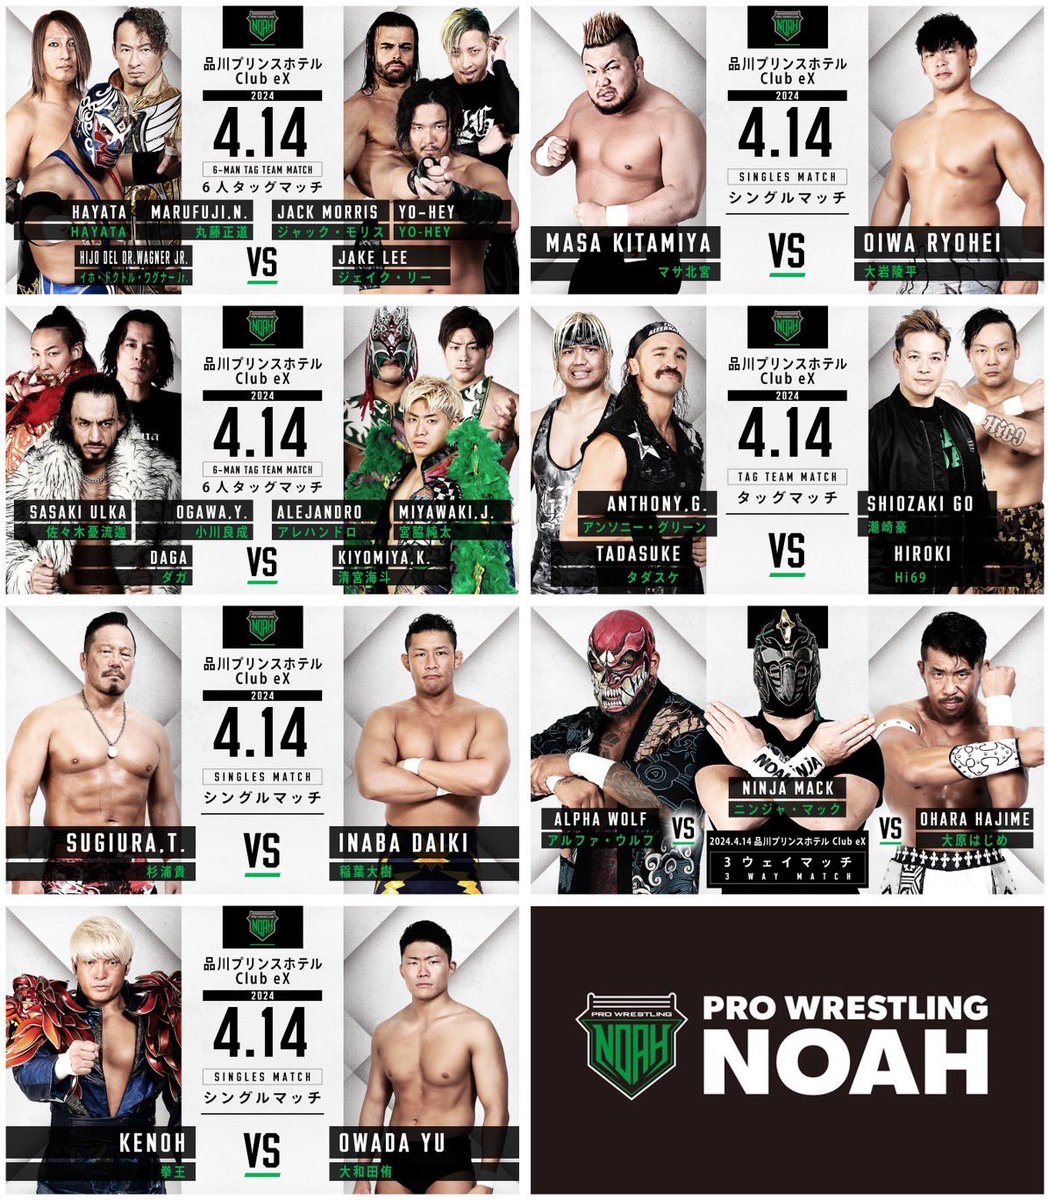 📣 UP NEXT - TWO Sunny Voyage shows in Shinagawa on Sunday! 🟢 Vol. 2 Card 👇 🛎 17.30 🇯🇵 📺 #wrestleUNIVERSE VOD to follow #noah_ghc